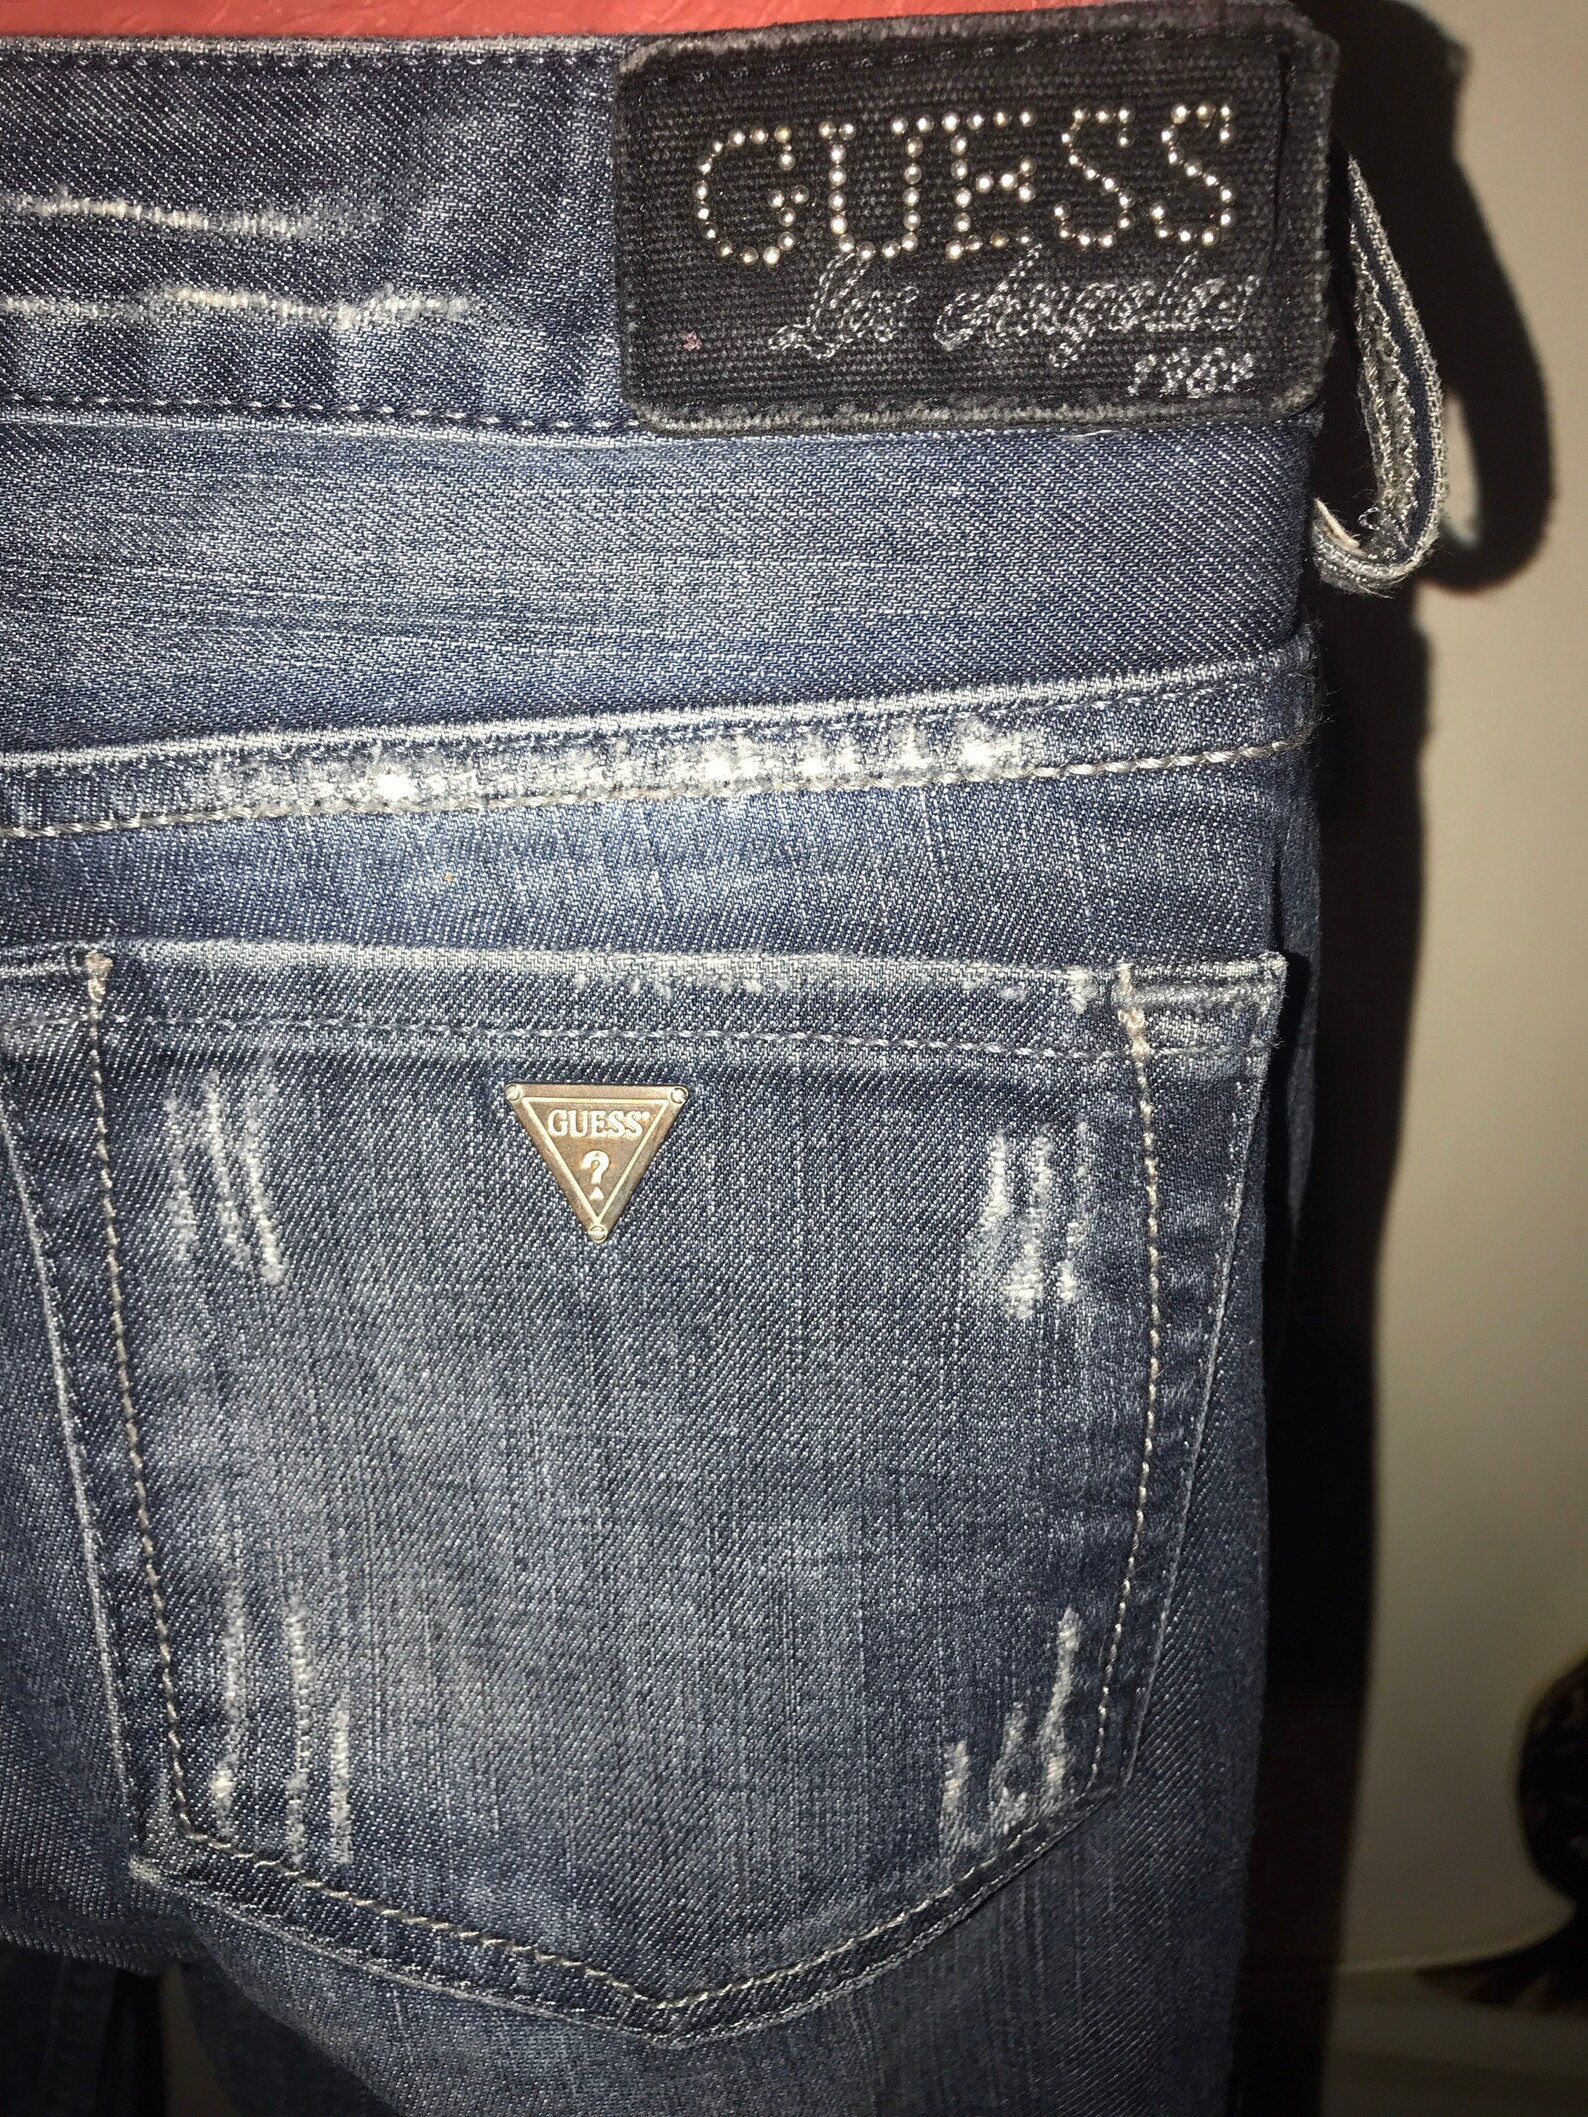 Vintage Distressed Guess Jeans. Low Rise Guess Jeans. Very - Etsy